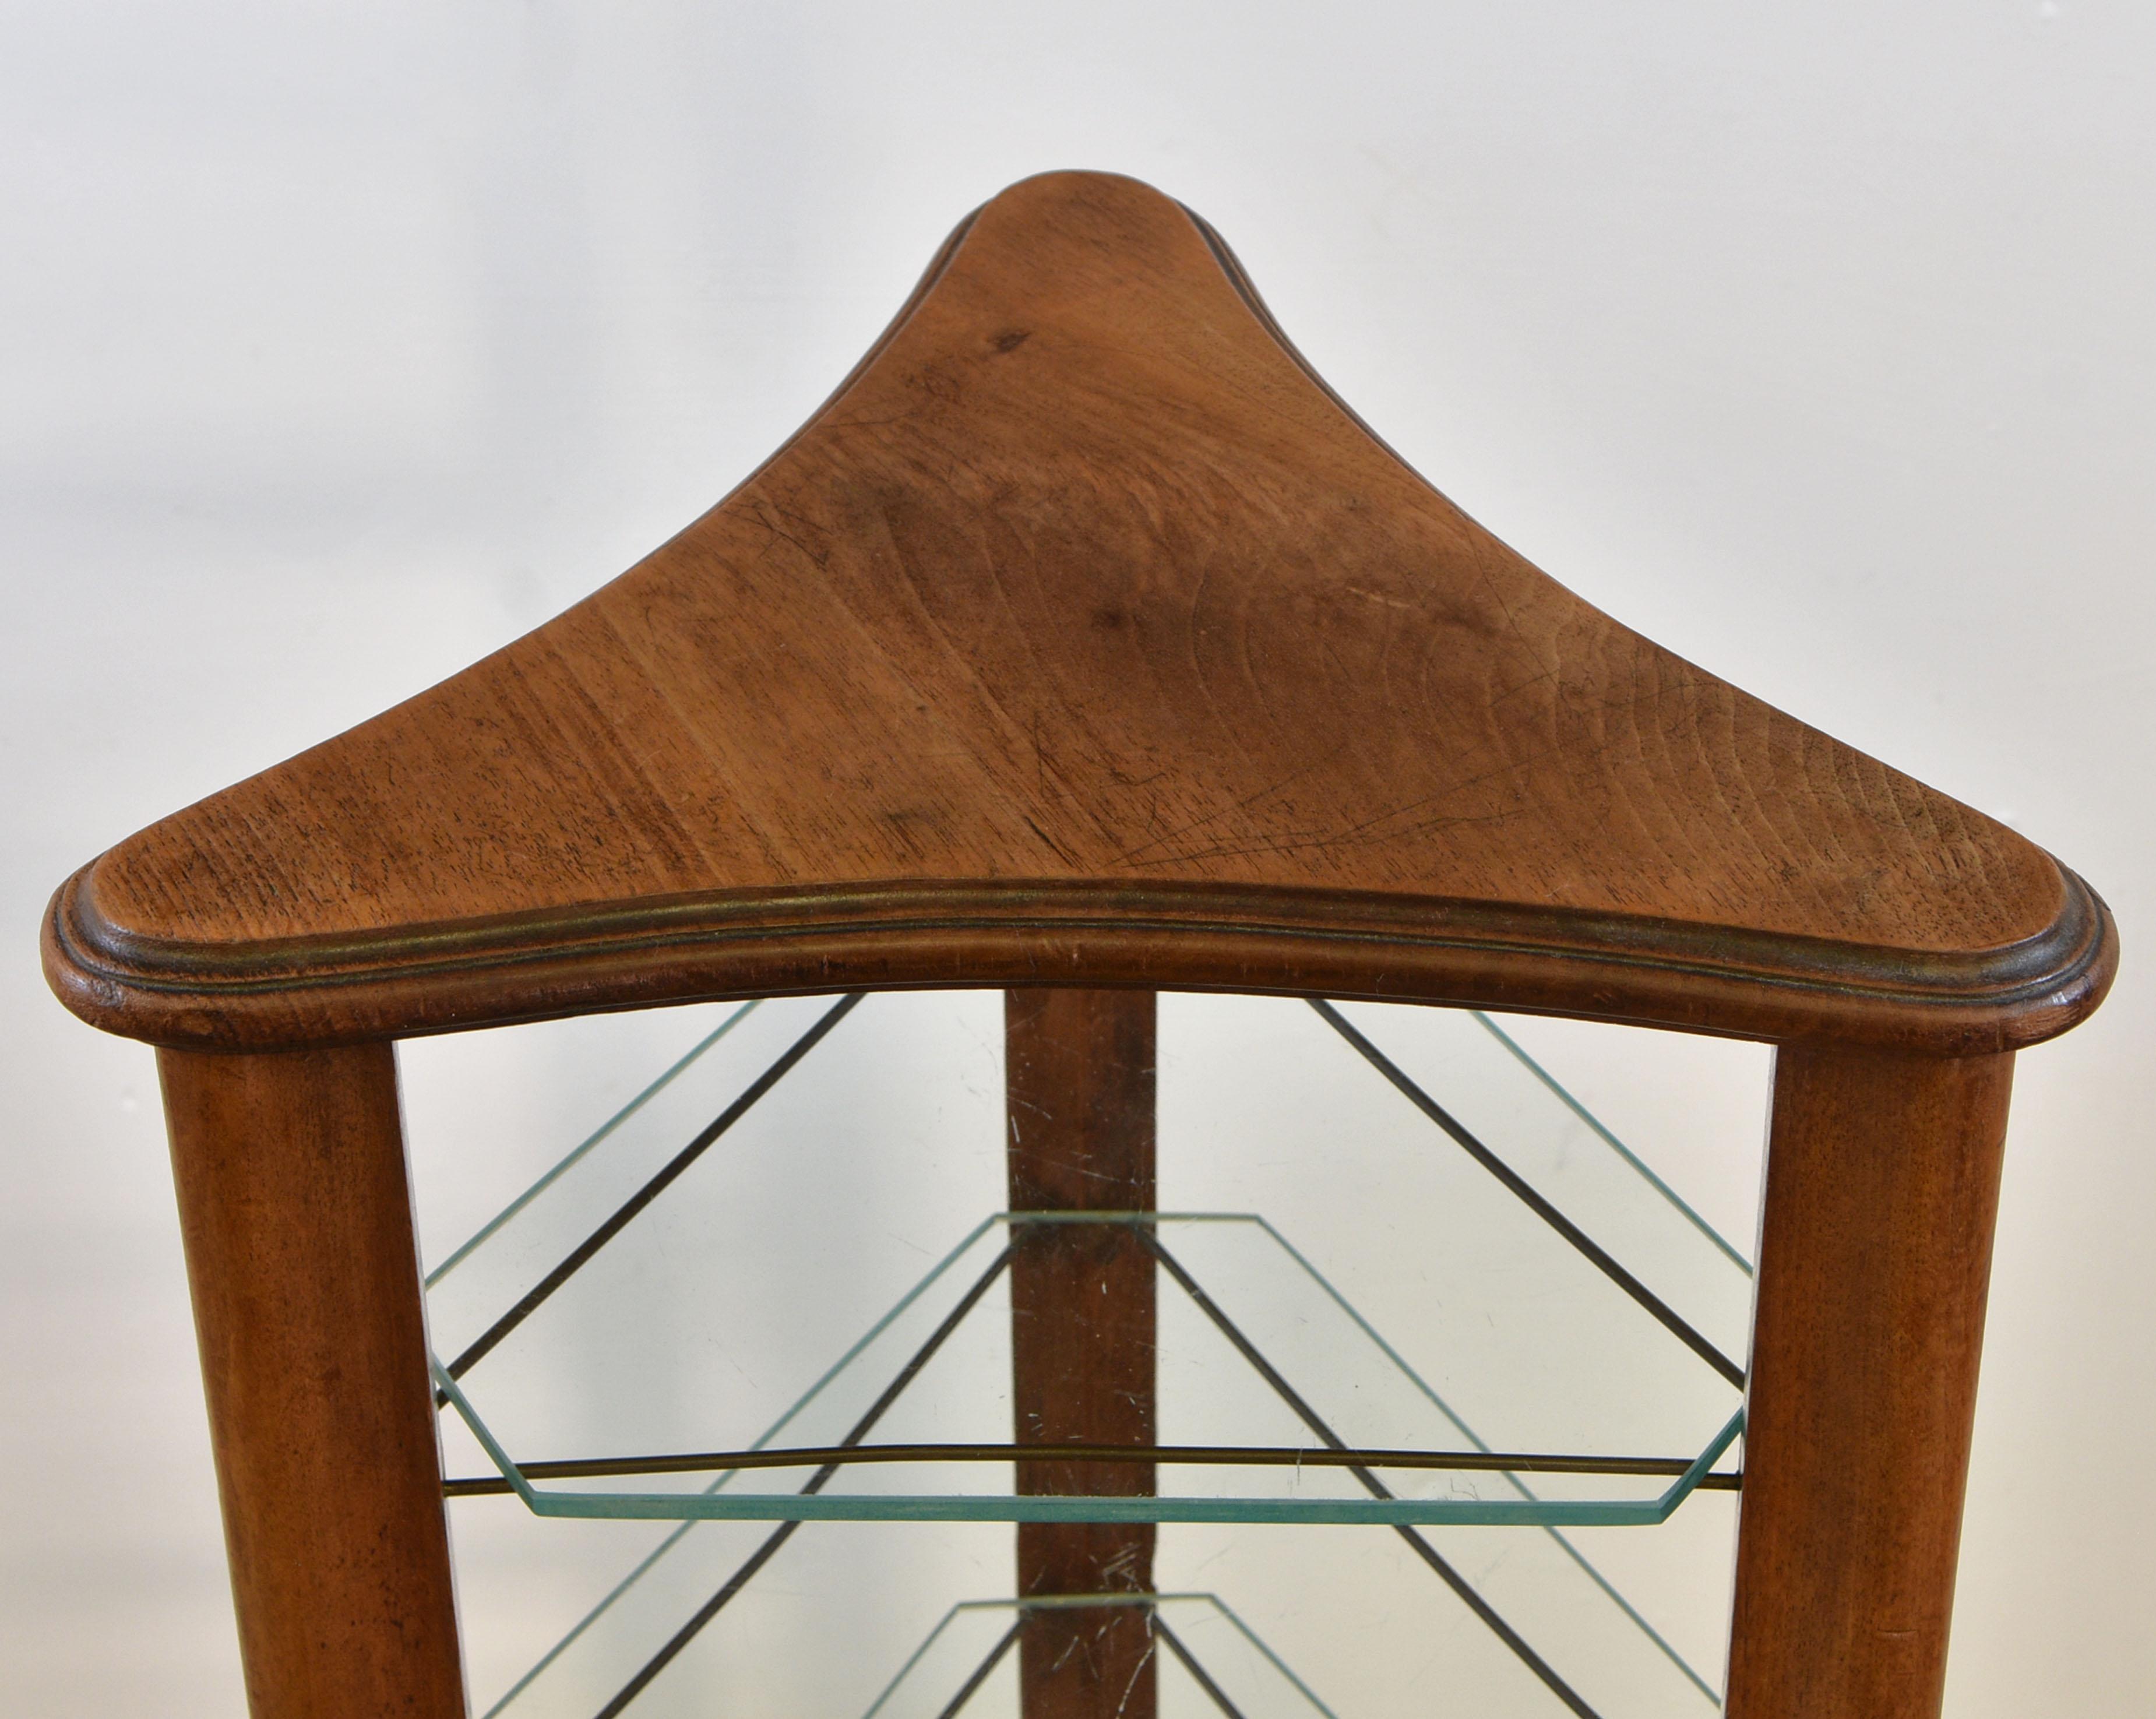 A lovely upright walnut shop display stand of triangular form with eleven glass shelves. Probably French. Circa 1930's.

The glass shelves simply sit on the brass supports.

Made in solid walnut, it is in good condition, showing a few marks and